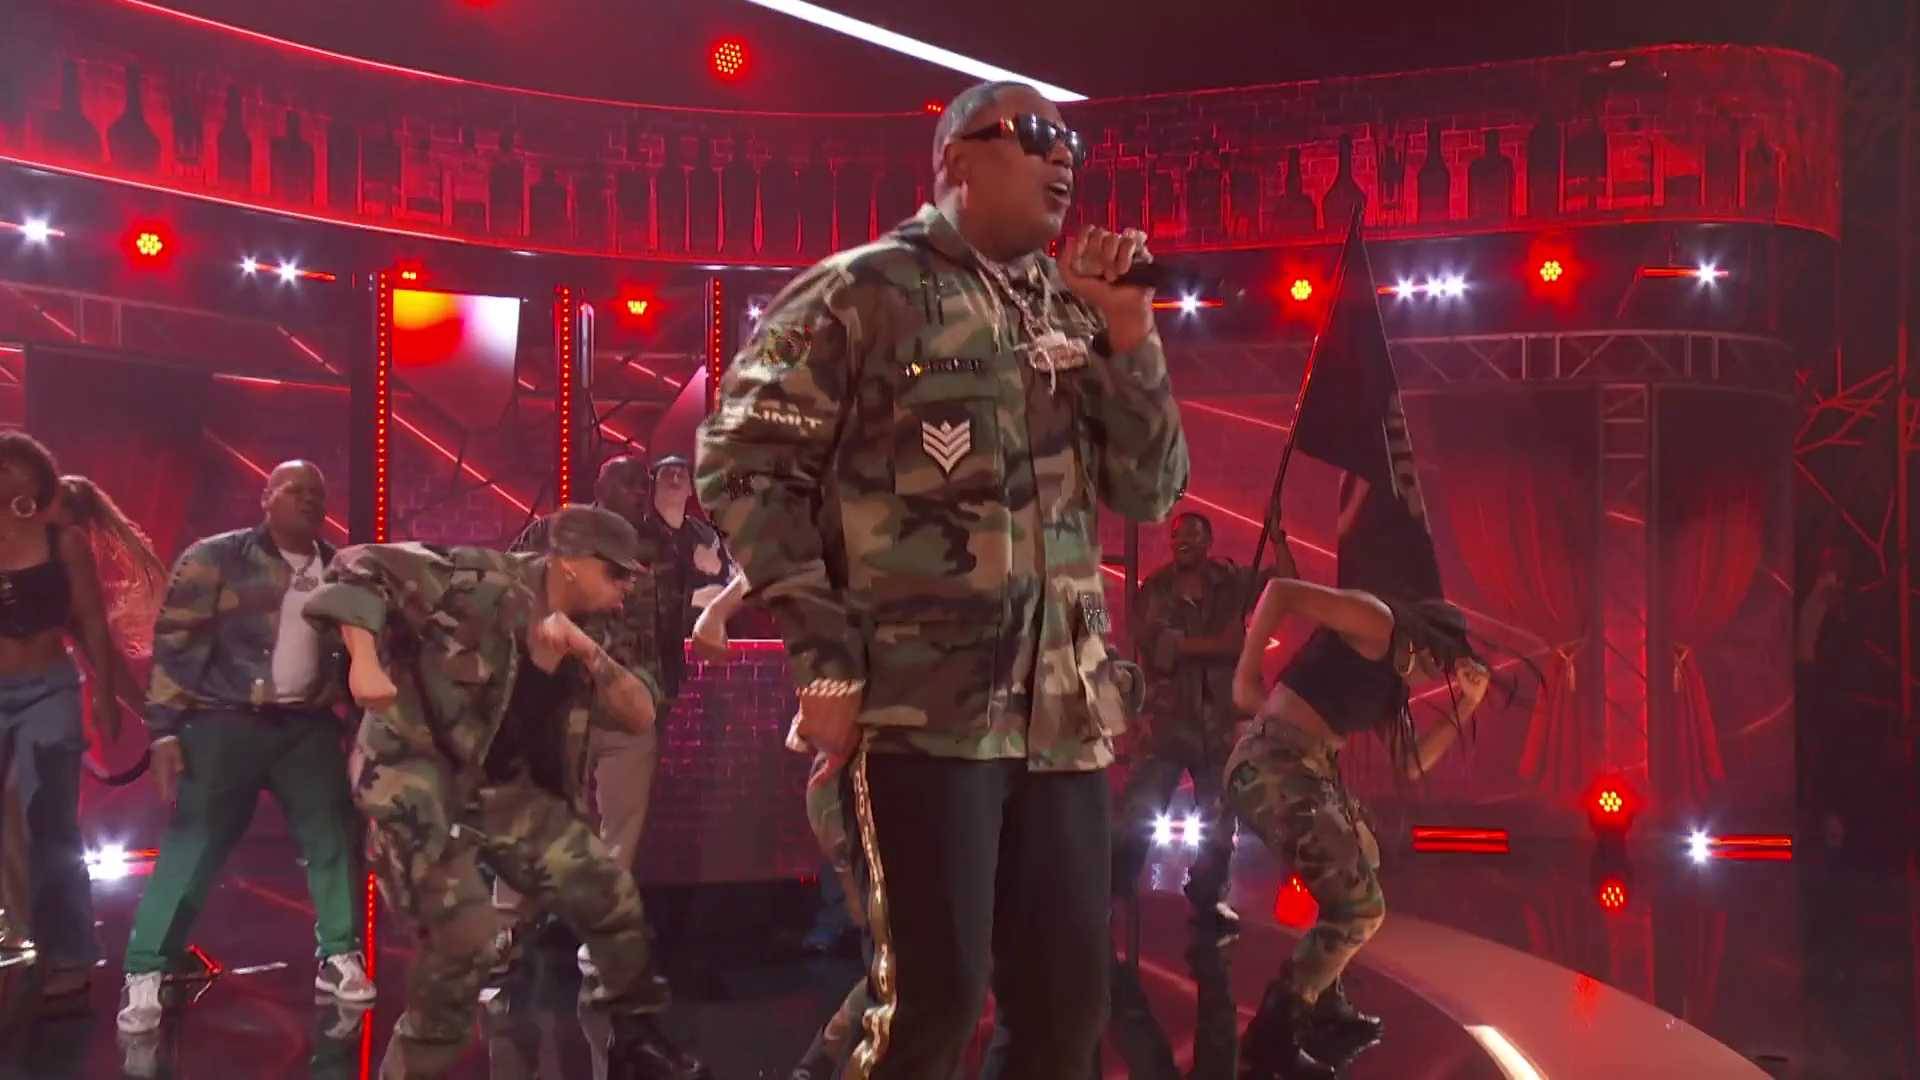 Jeezy, T.I. and Master P perform a medley of their songs, including "Trap Star," "You Don't Know Me" and "Make ‘Em Say Ugh" at the BET Awards 2023.